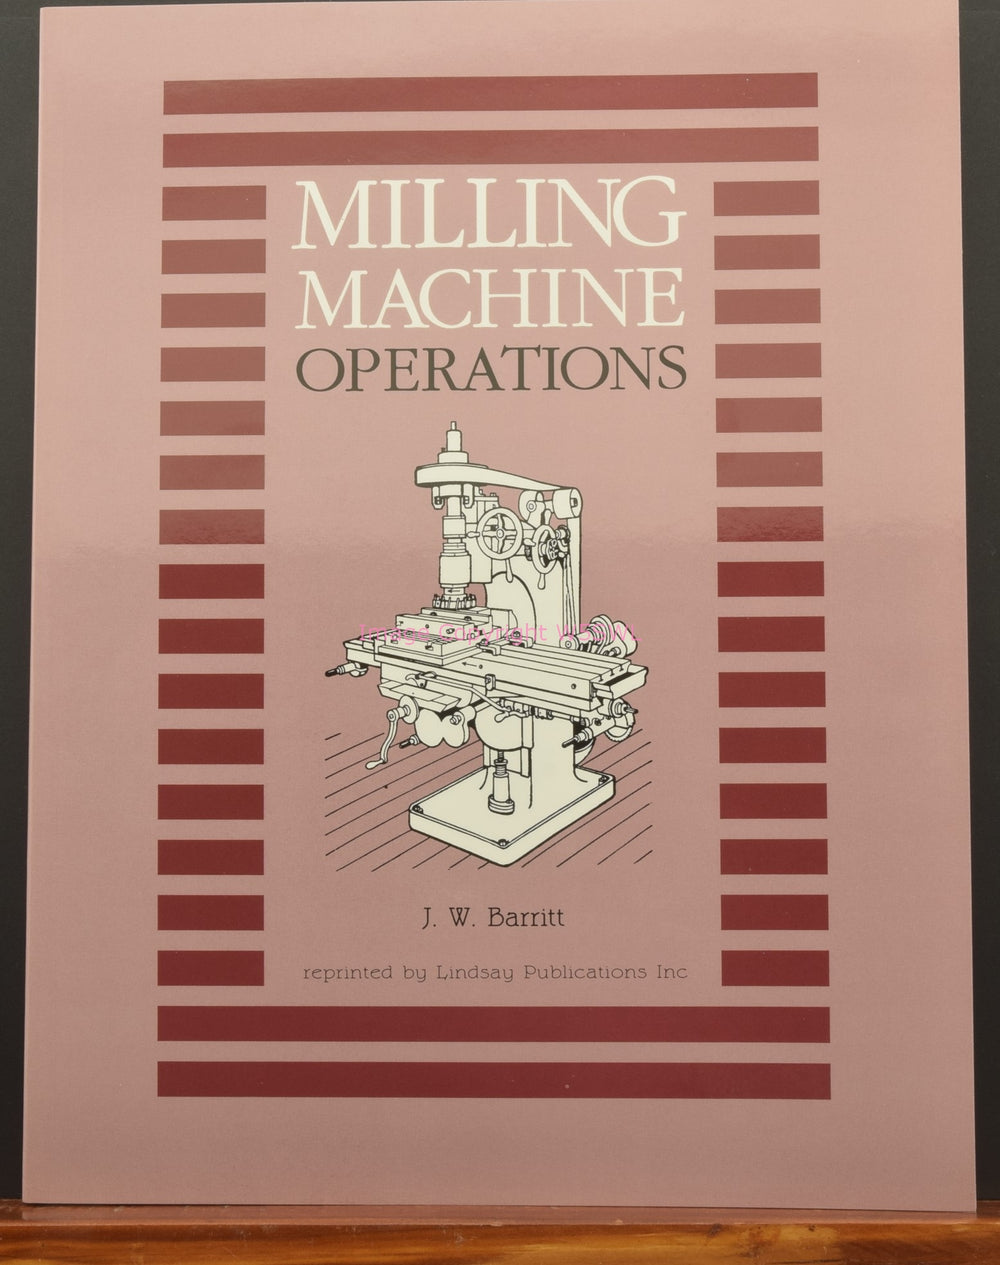 MILLING MACHINE OPERATIONS By J W Barritt - Dave's Hobby Shop by W5SWL